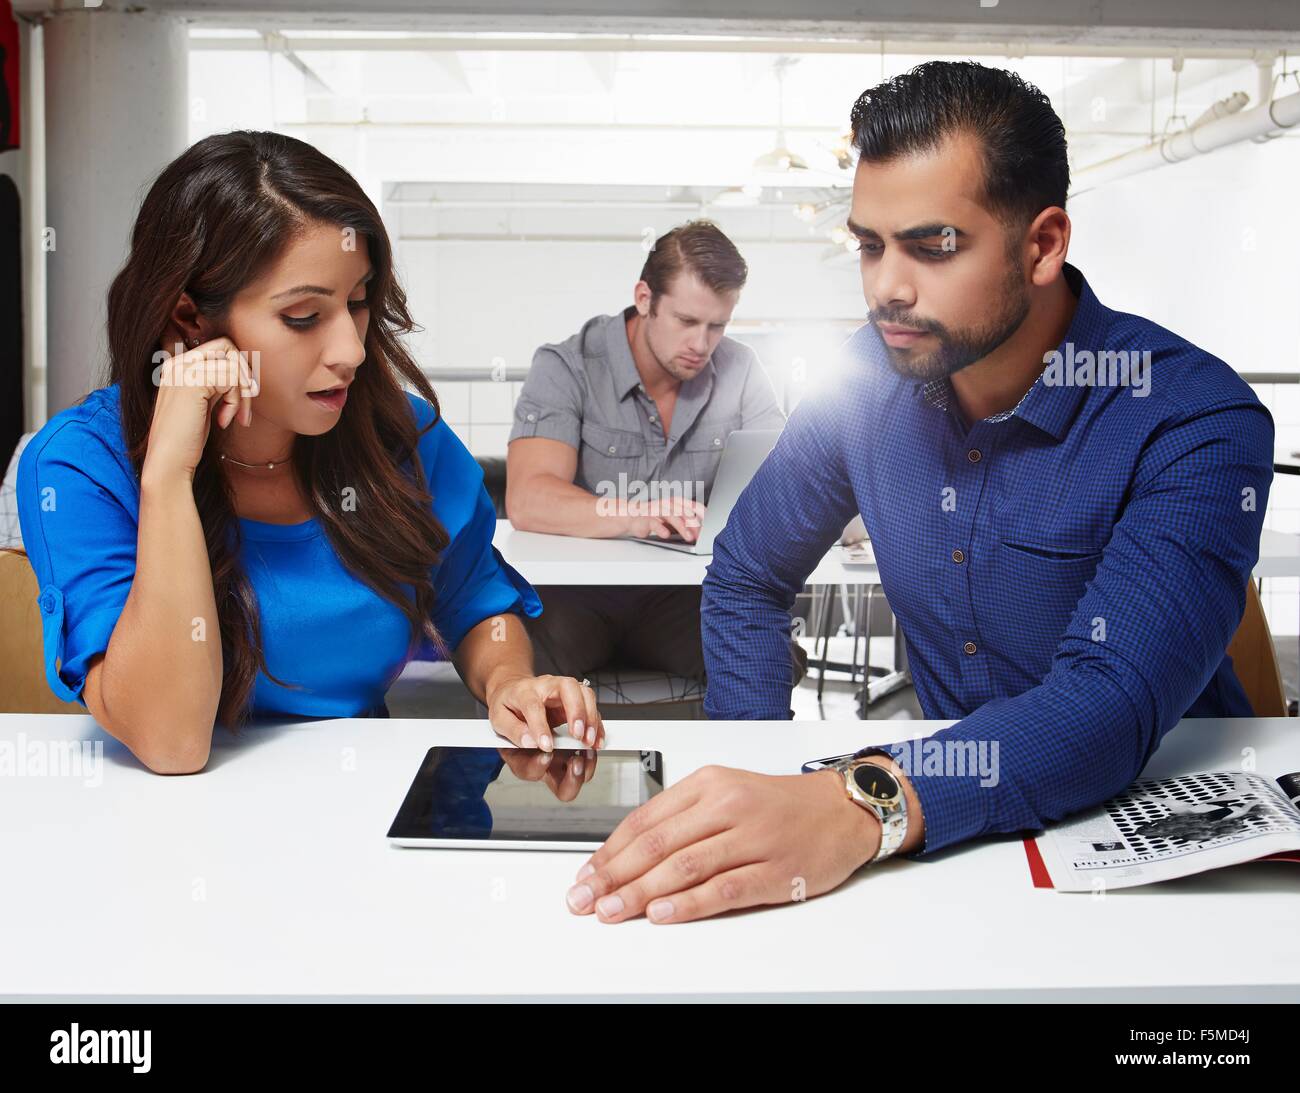 Businesswoman and businessman sitting at desk, looking at digital tablet Stock Photo